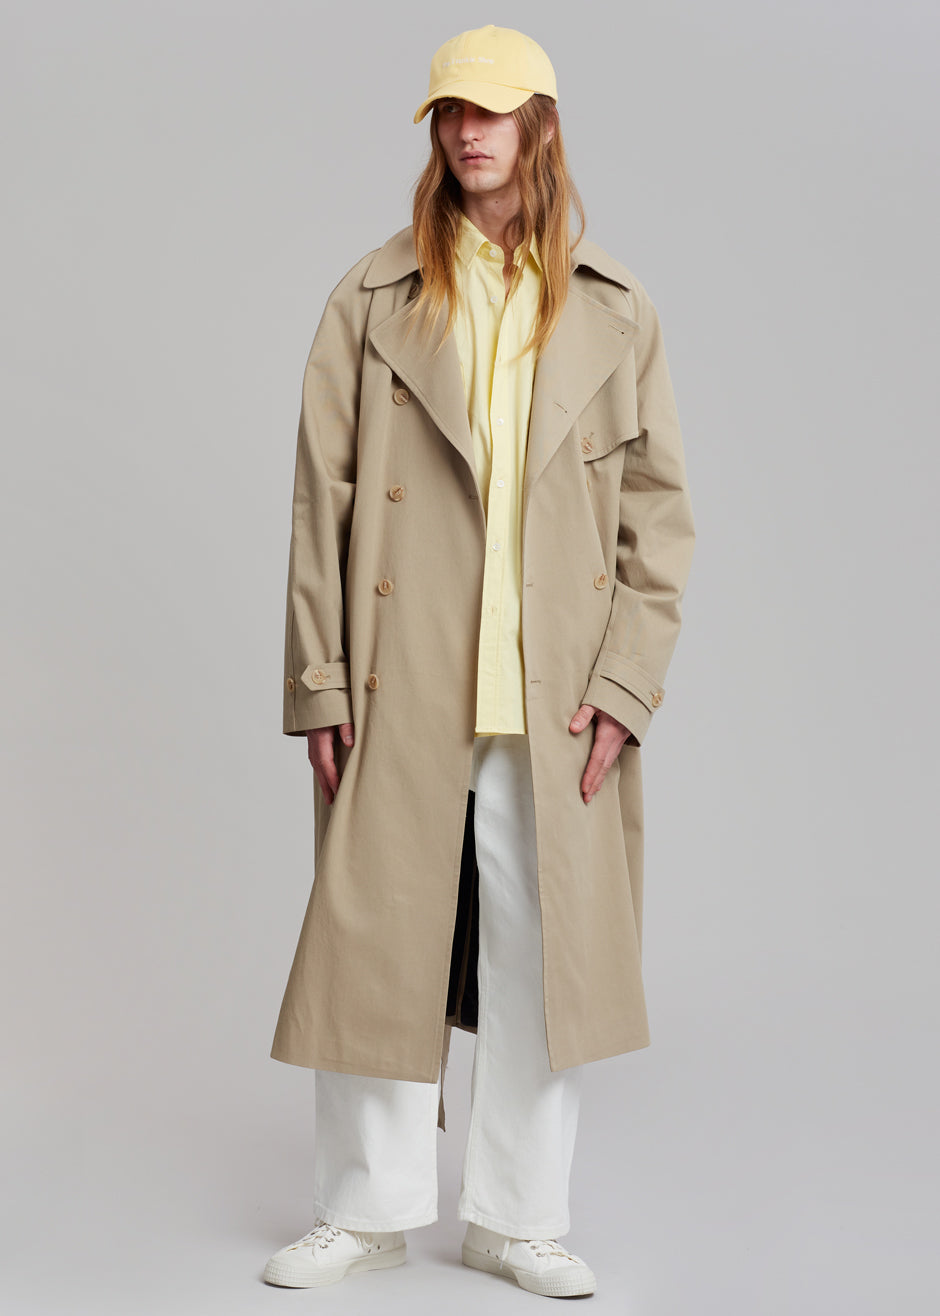 Umi Belted Trench Coat - Beige - 11 - Umi Belted Trench Coat - Beige [gender-male]